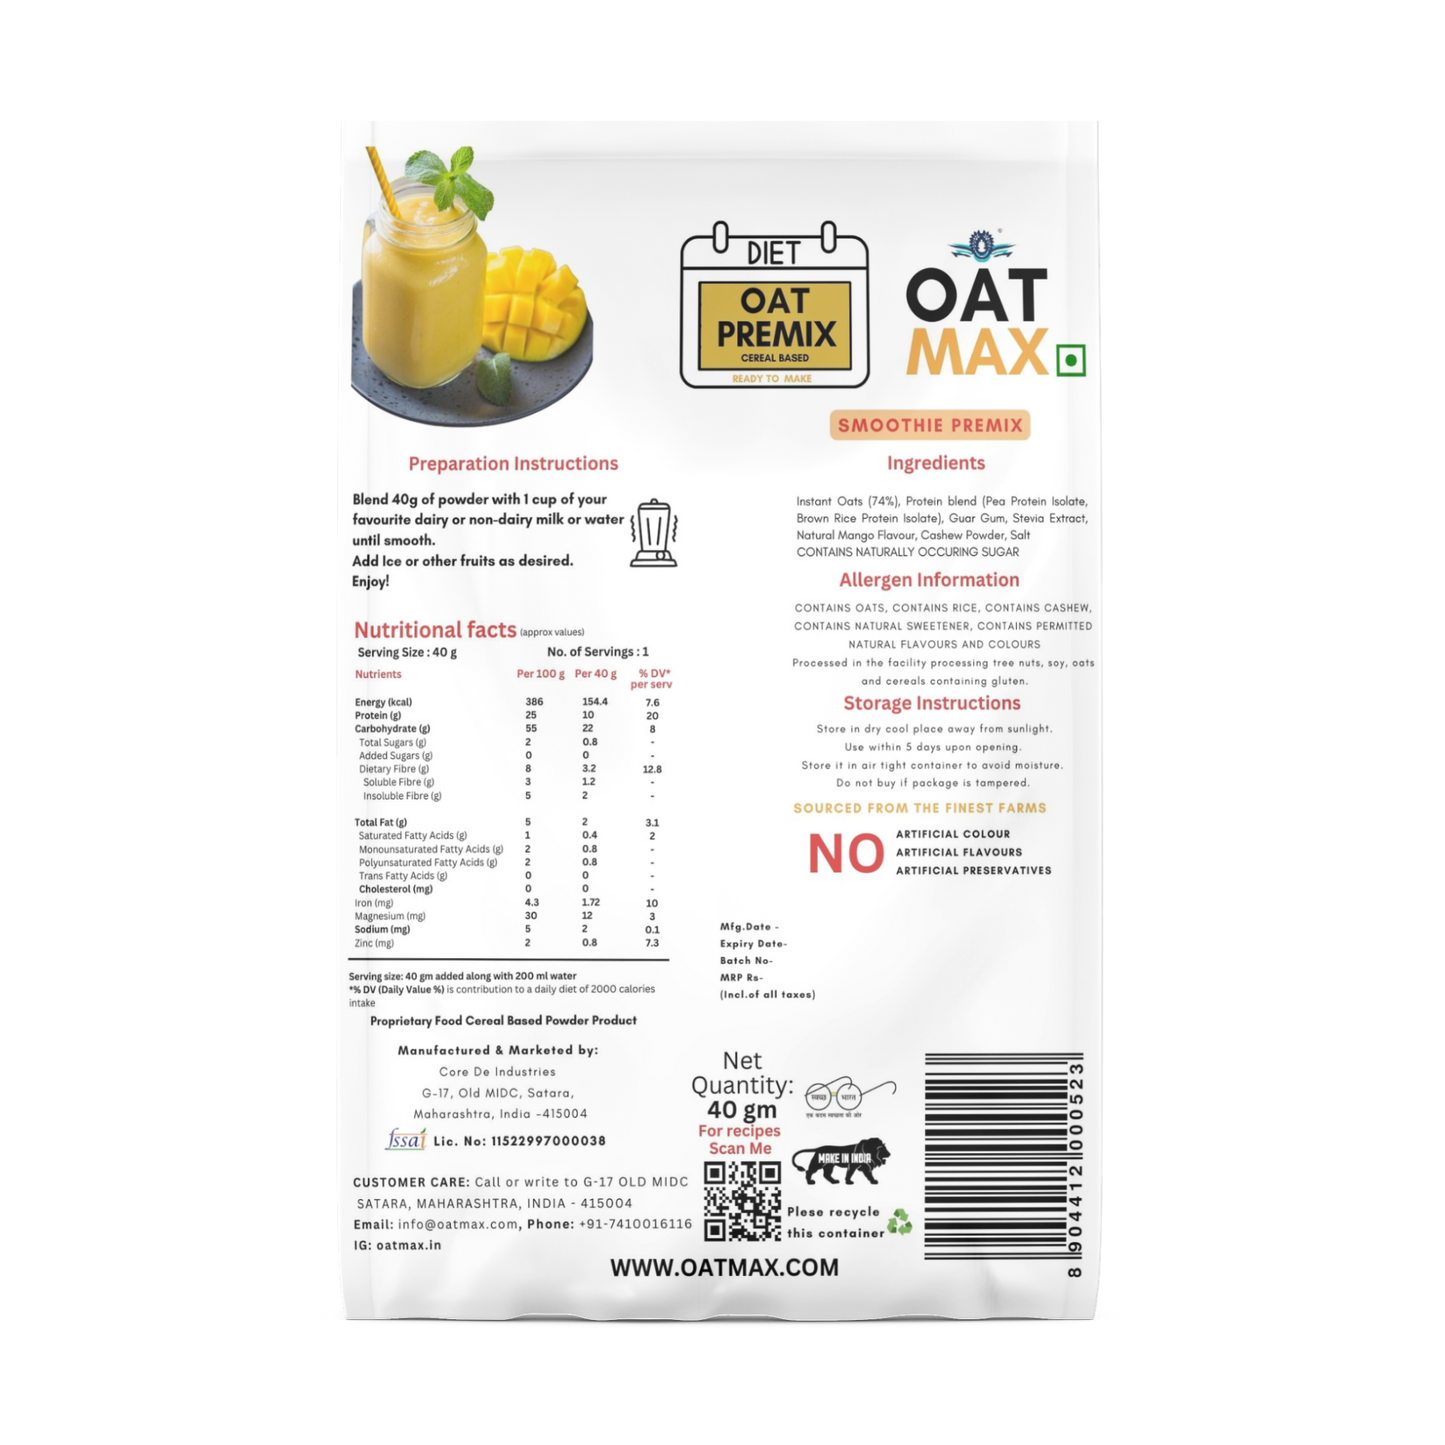 OATMAX MANGO SMOOTHIE PREMIX – MANGO DRINK POWDER | NATURAL POWDERS AND OATS | INSTANT MILK OR WATER MIX | NO ADDED PRESERVATIVES OR FLAVOURS